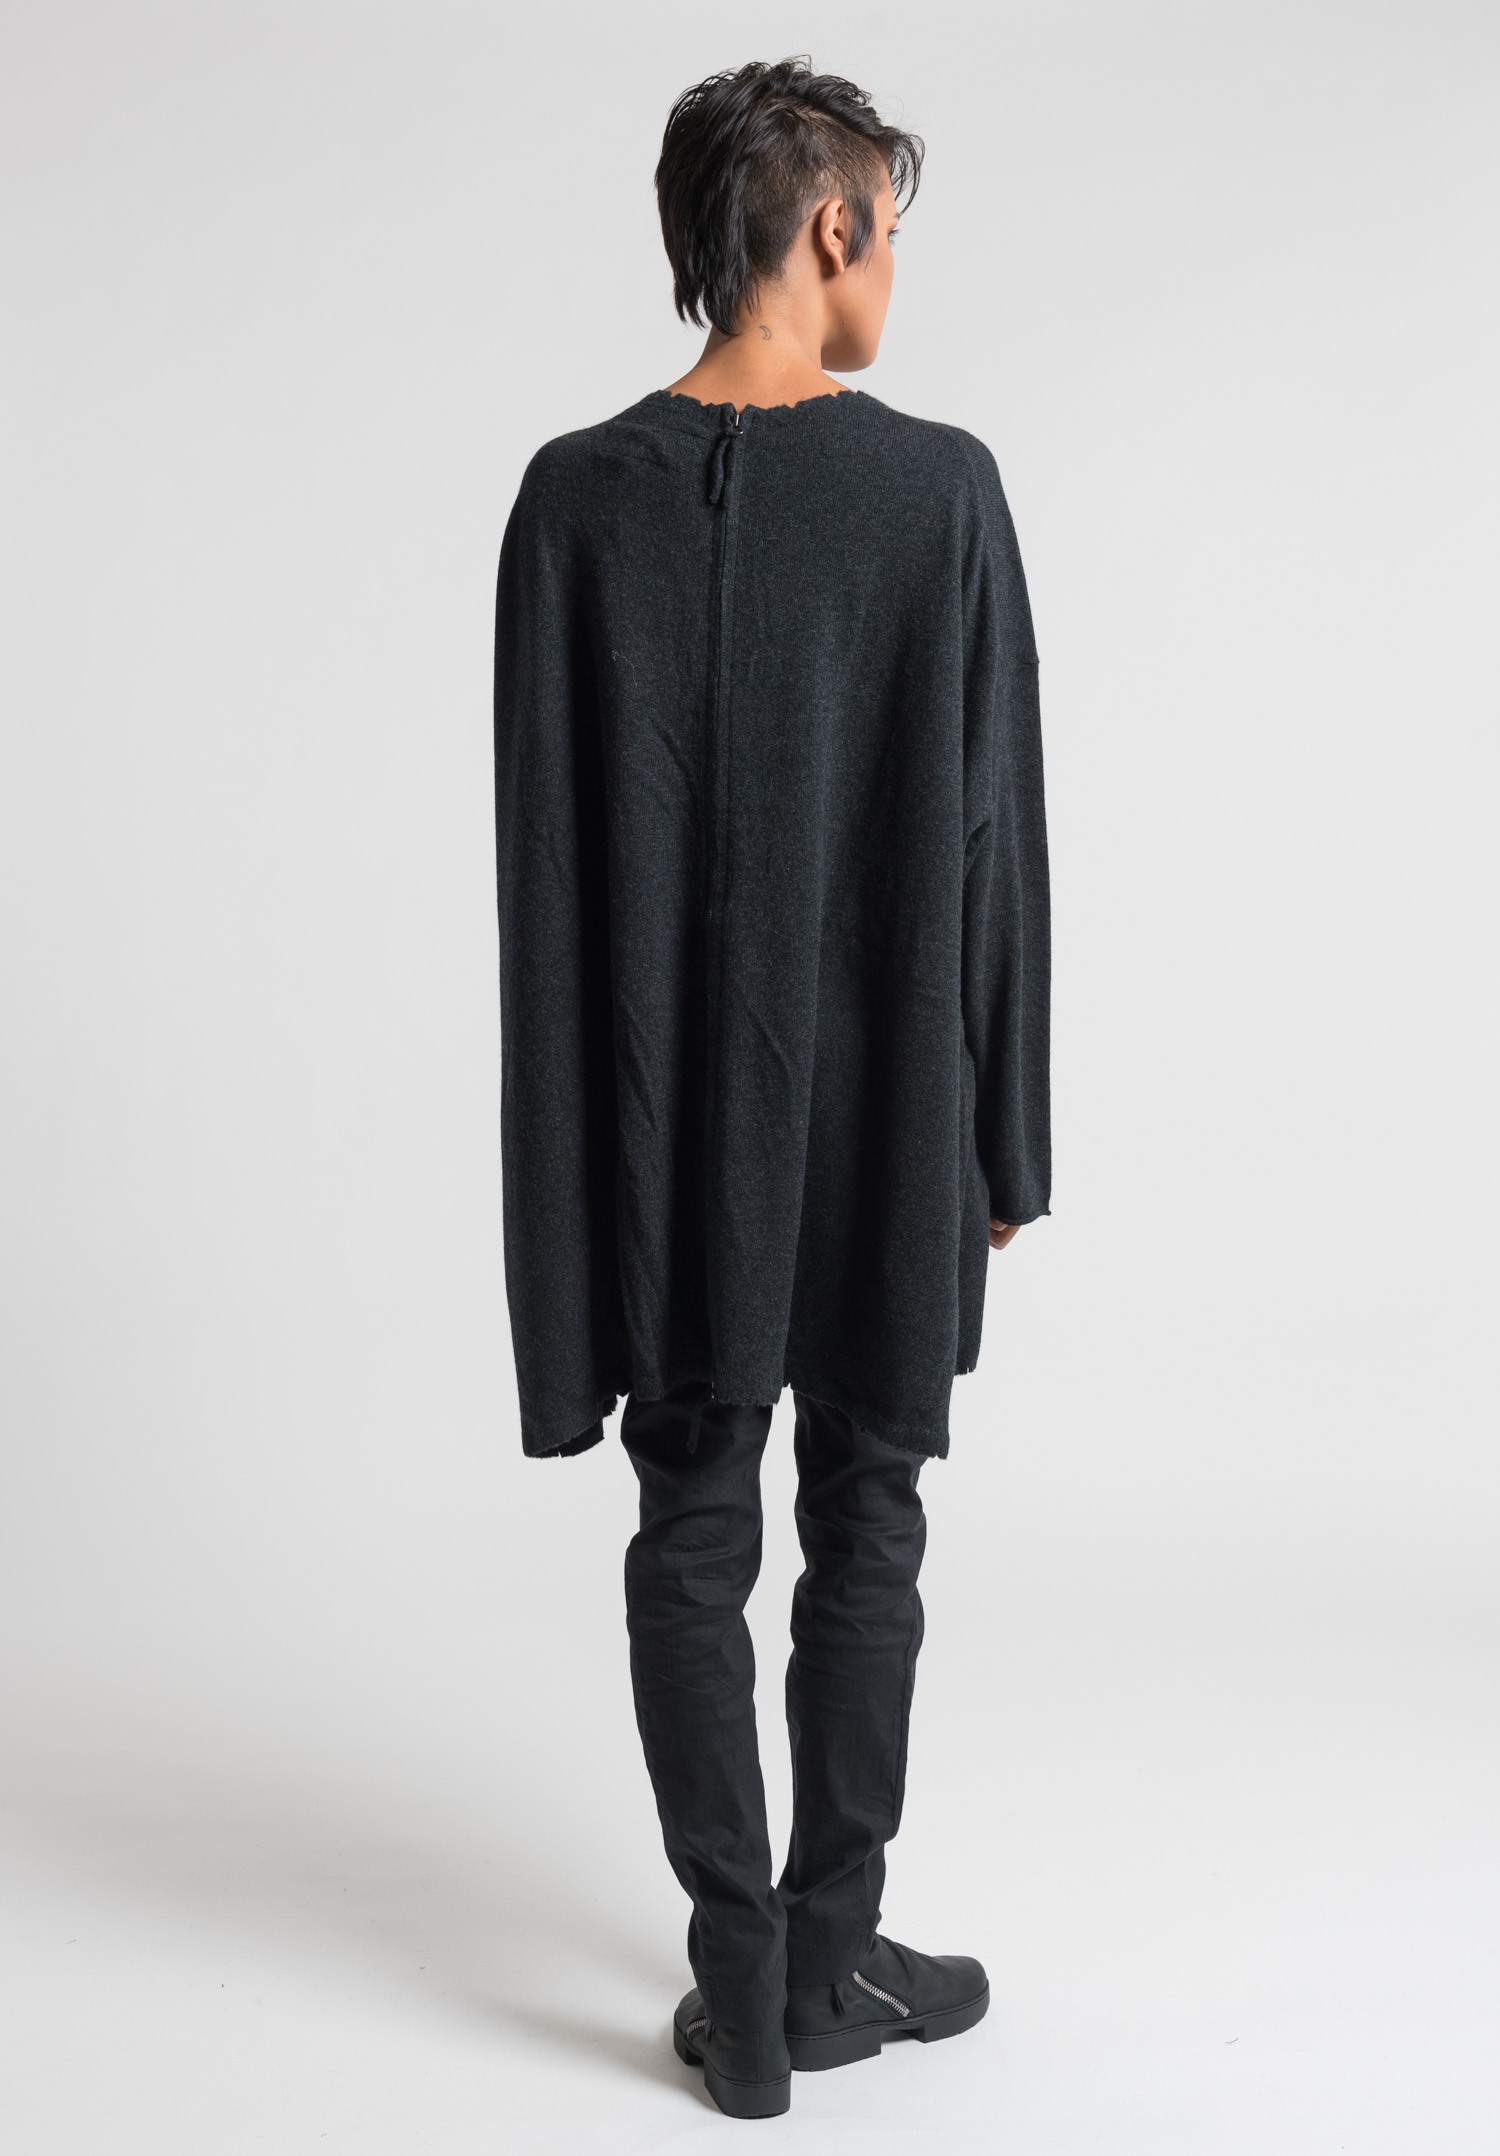 Rundholz Dip Zipper  Back  Knitted Tunic  in Charcoal Santa 